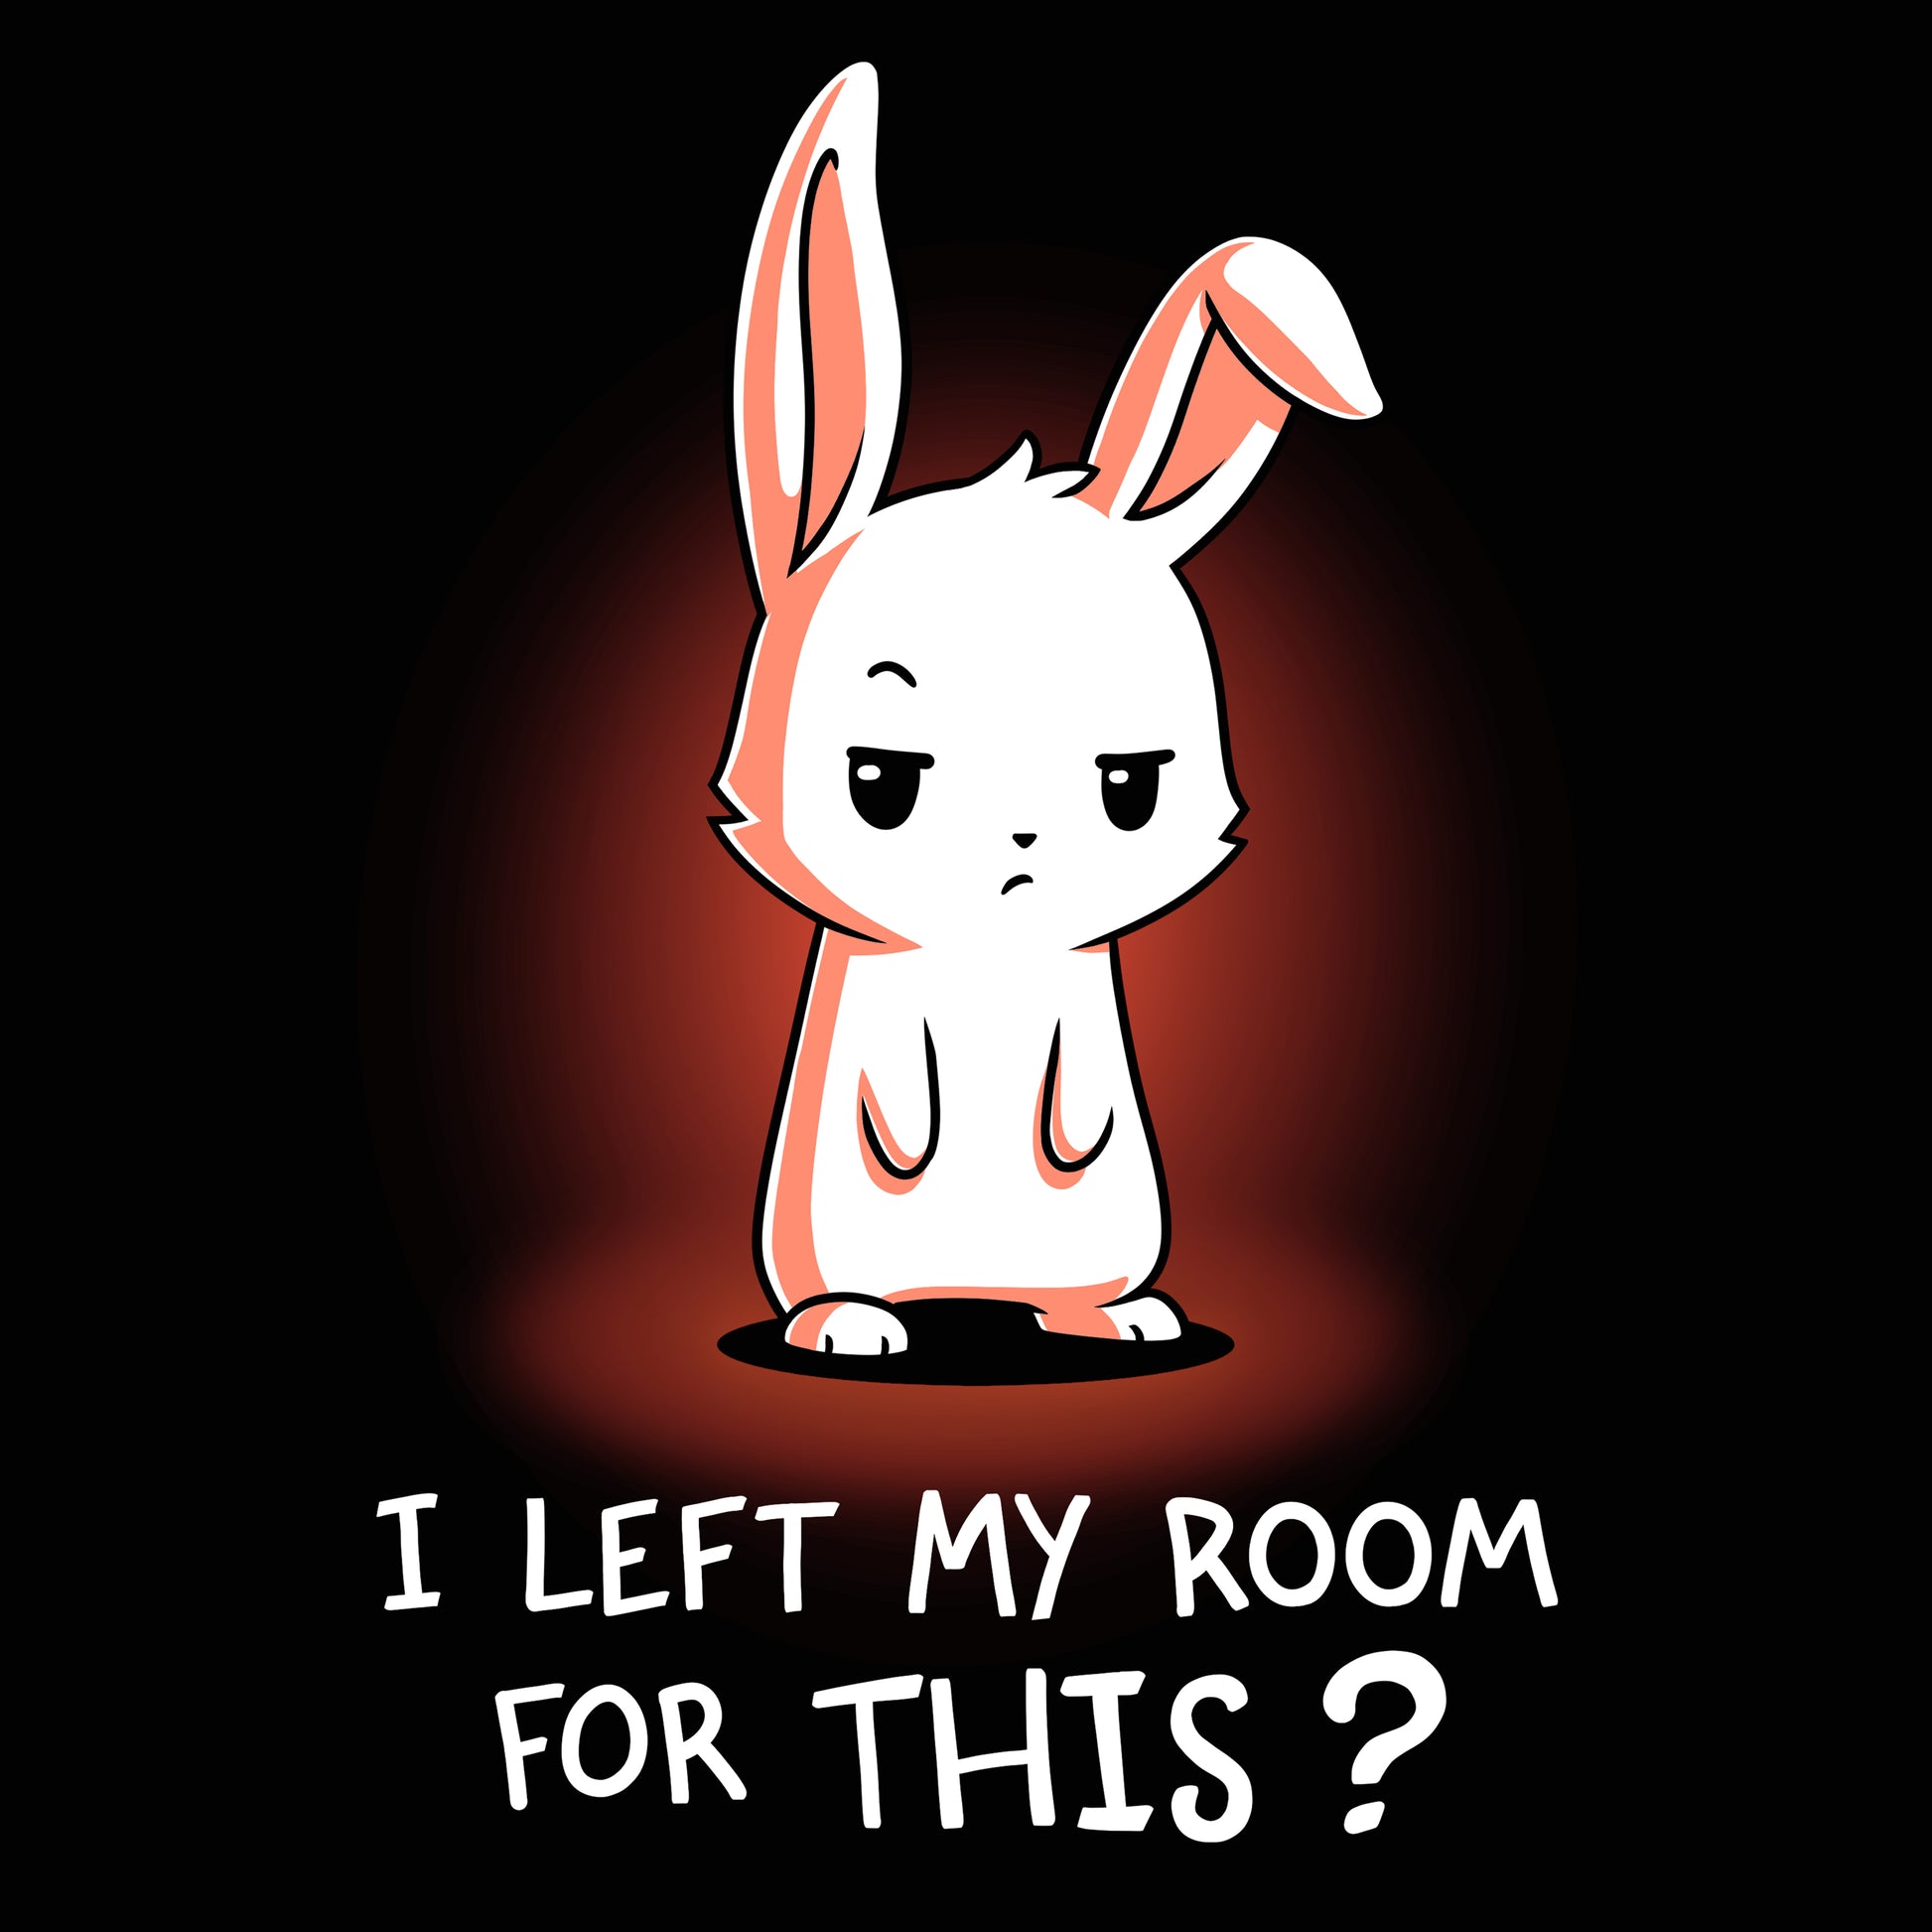 Cartoon of an unimpressed rabbit with the caption "I Left My Room For This?" adorning a black t-shirt made of super soft cotton. This unisex tee from monsterdigital is perfect for those who appreciate humor and comfort.